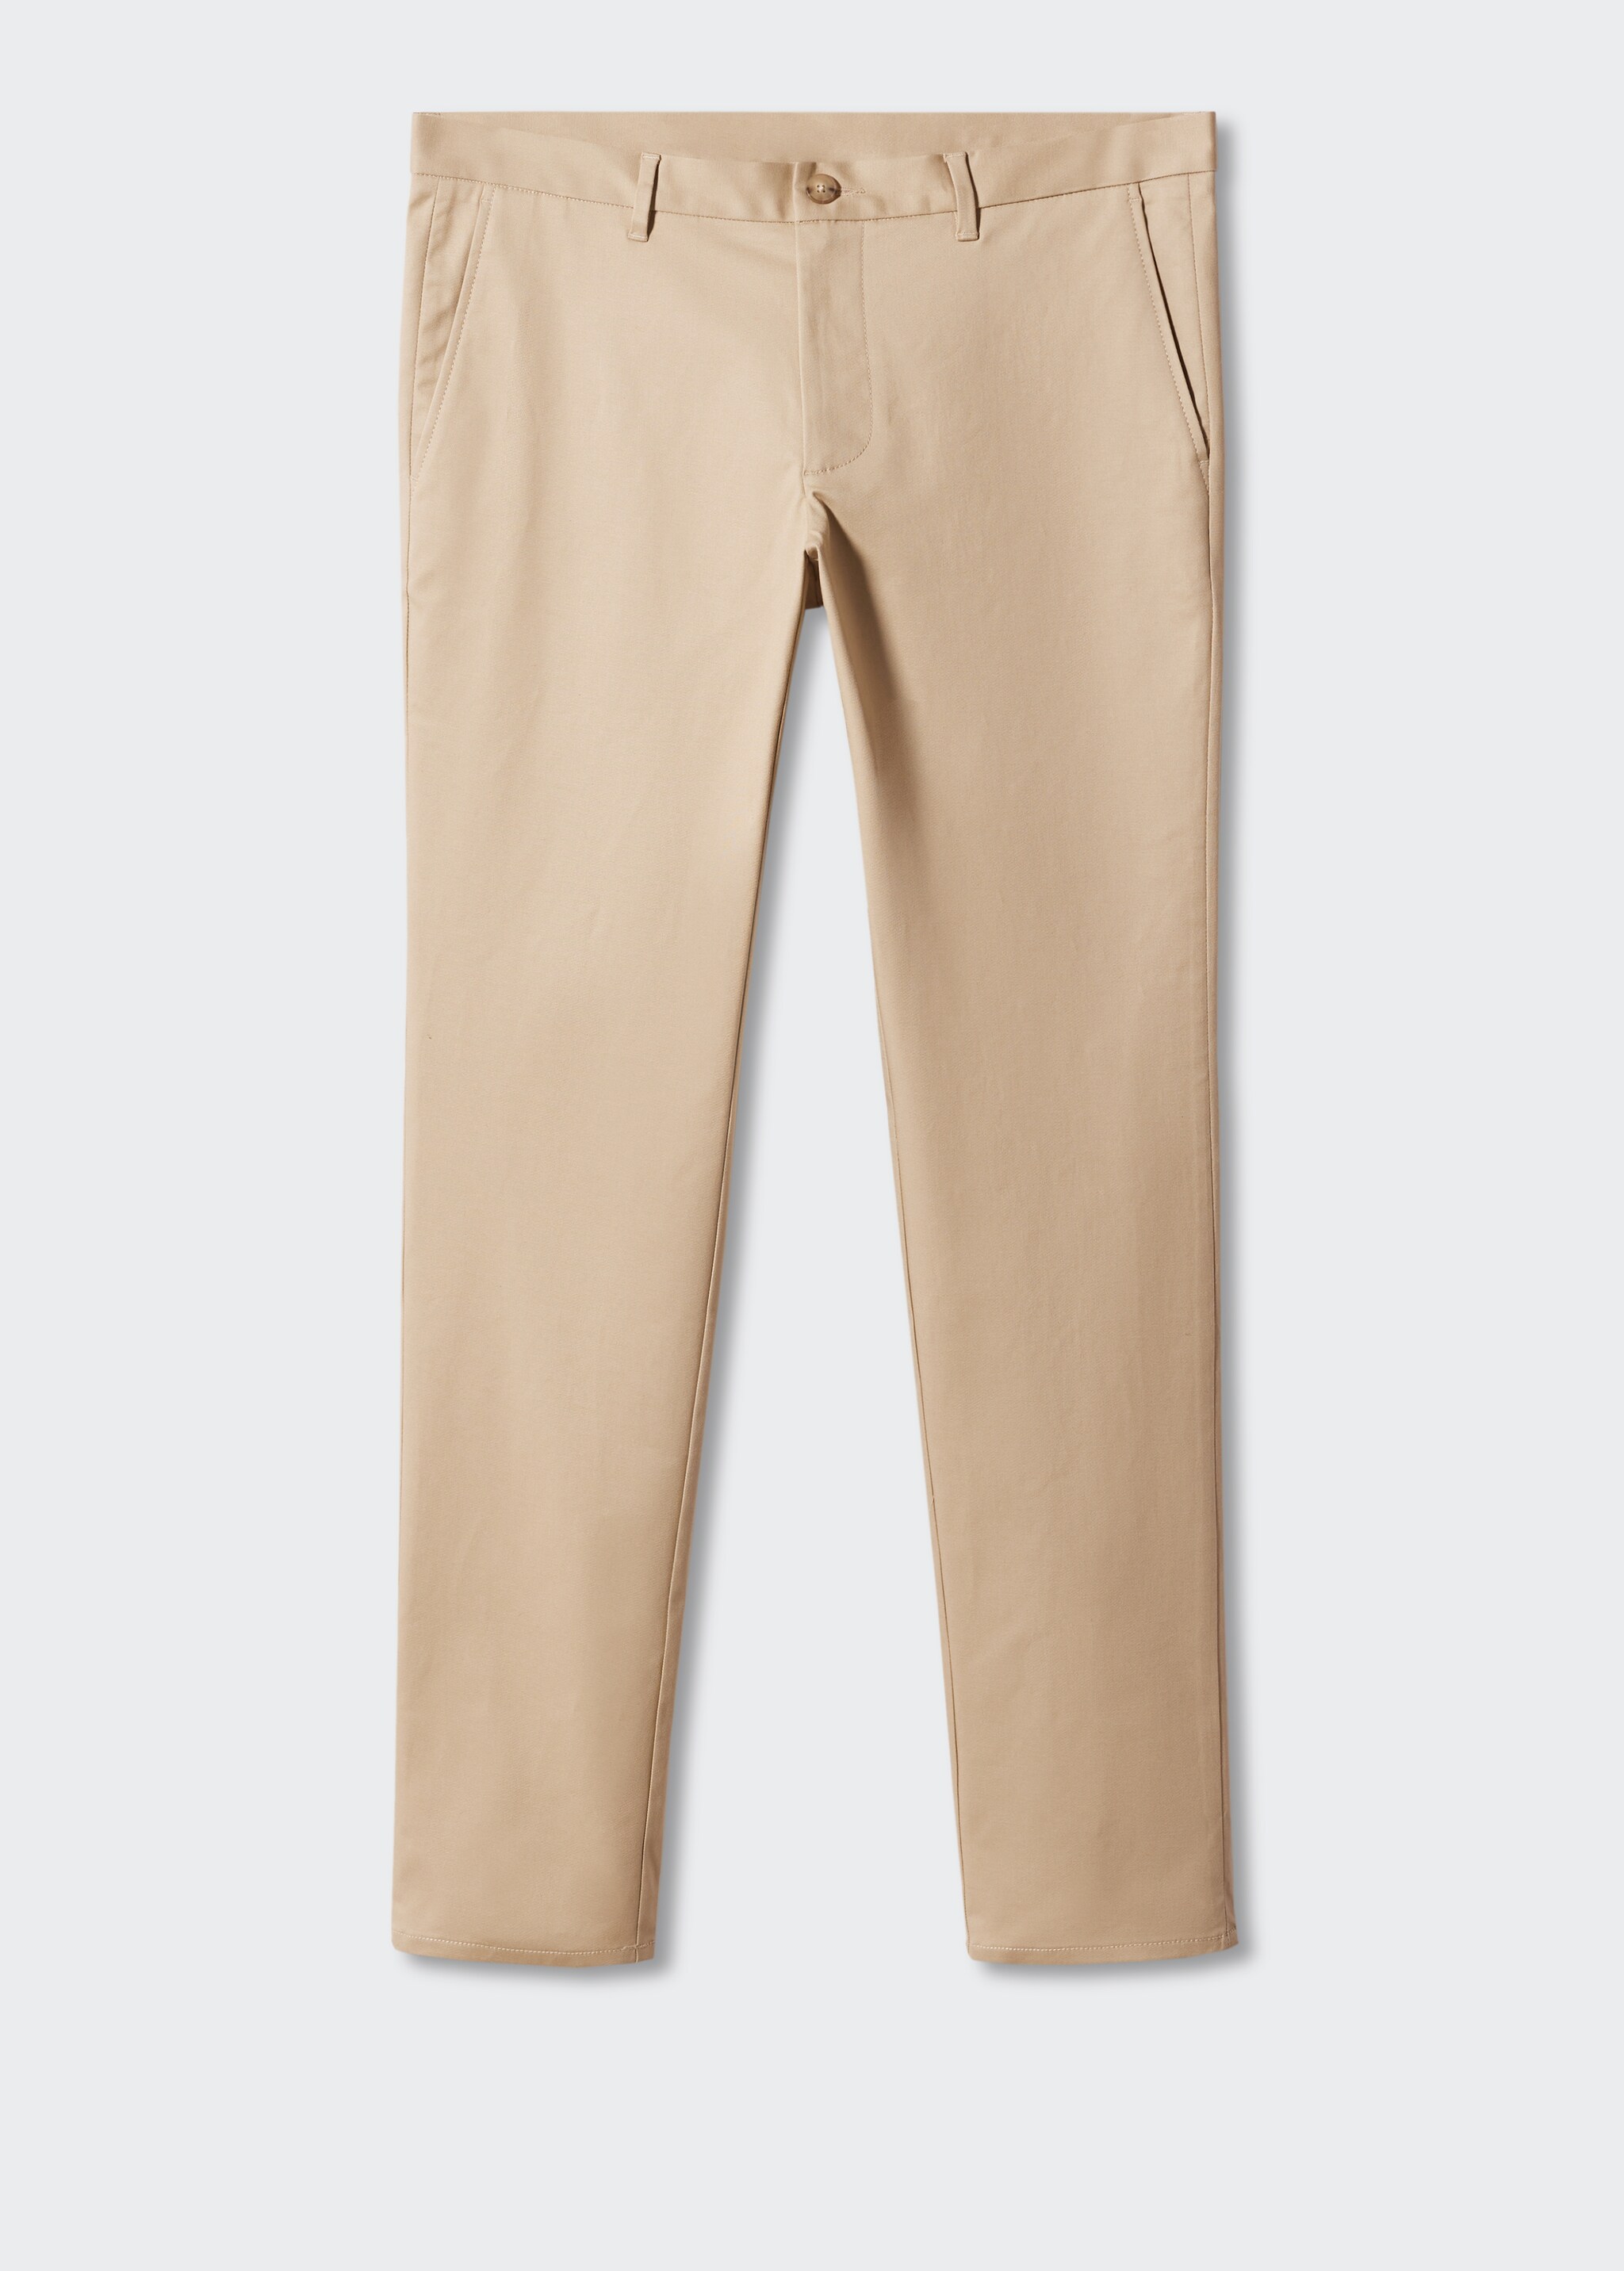 Skinny chino trousers - Article without model